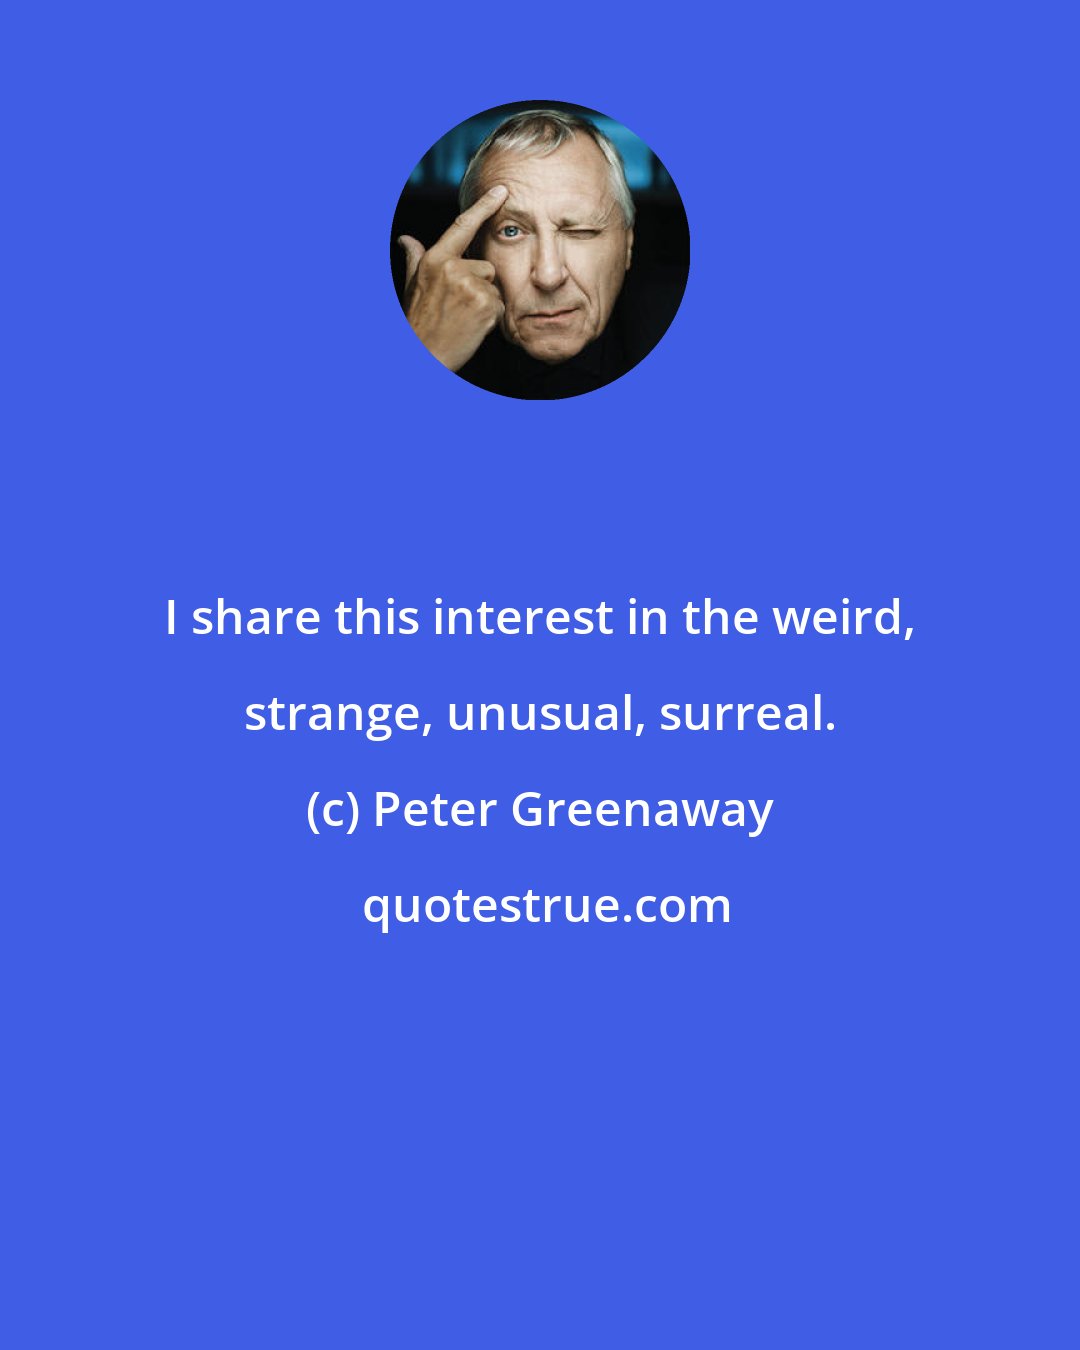 Peter Greenaway: I share this interest in the weird, strange, unusual, surreal.